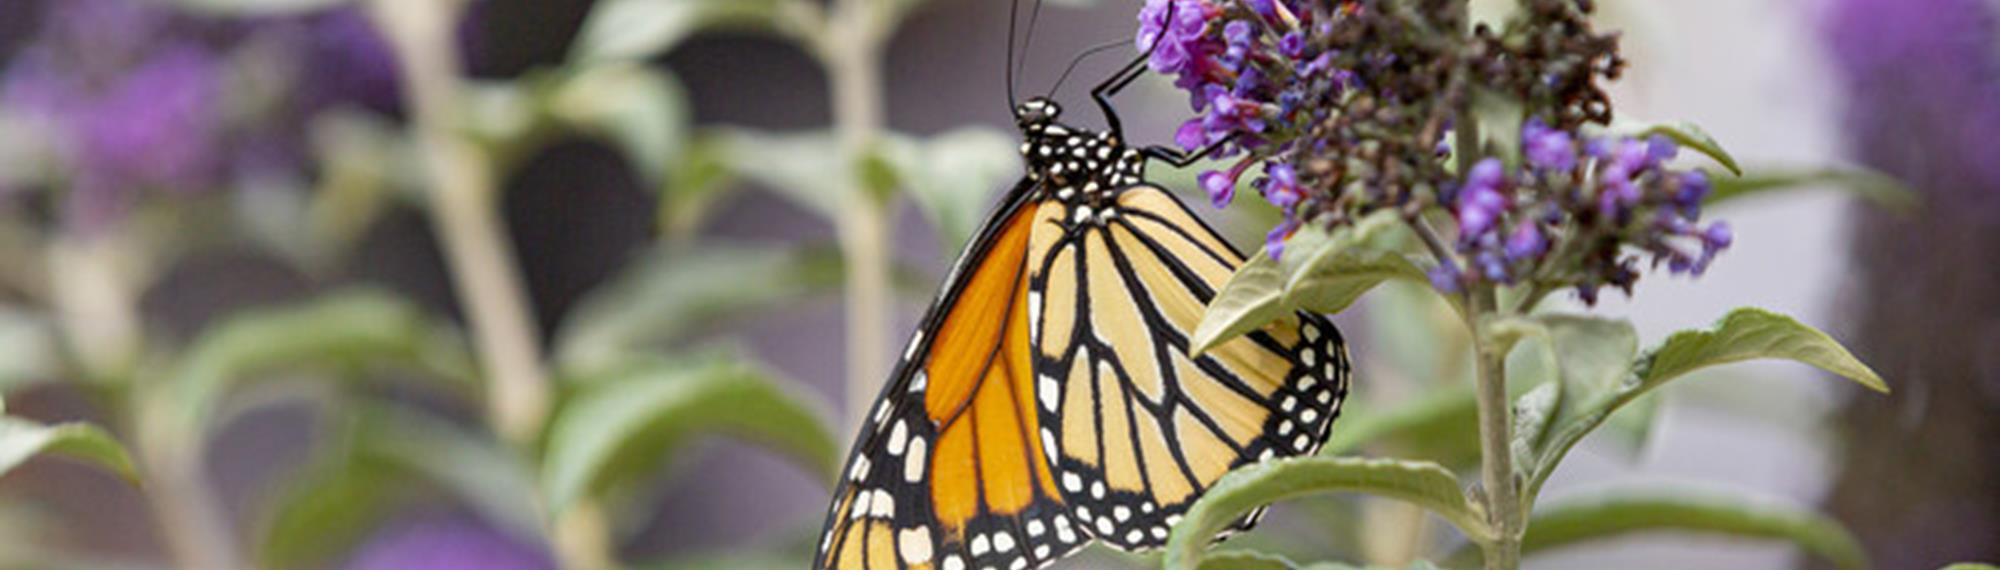 Close-up of a Monarch Butterfly perched on a violet flower in the Butterfly House.